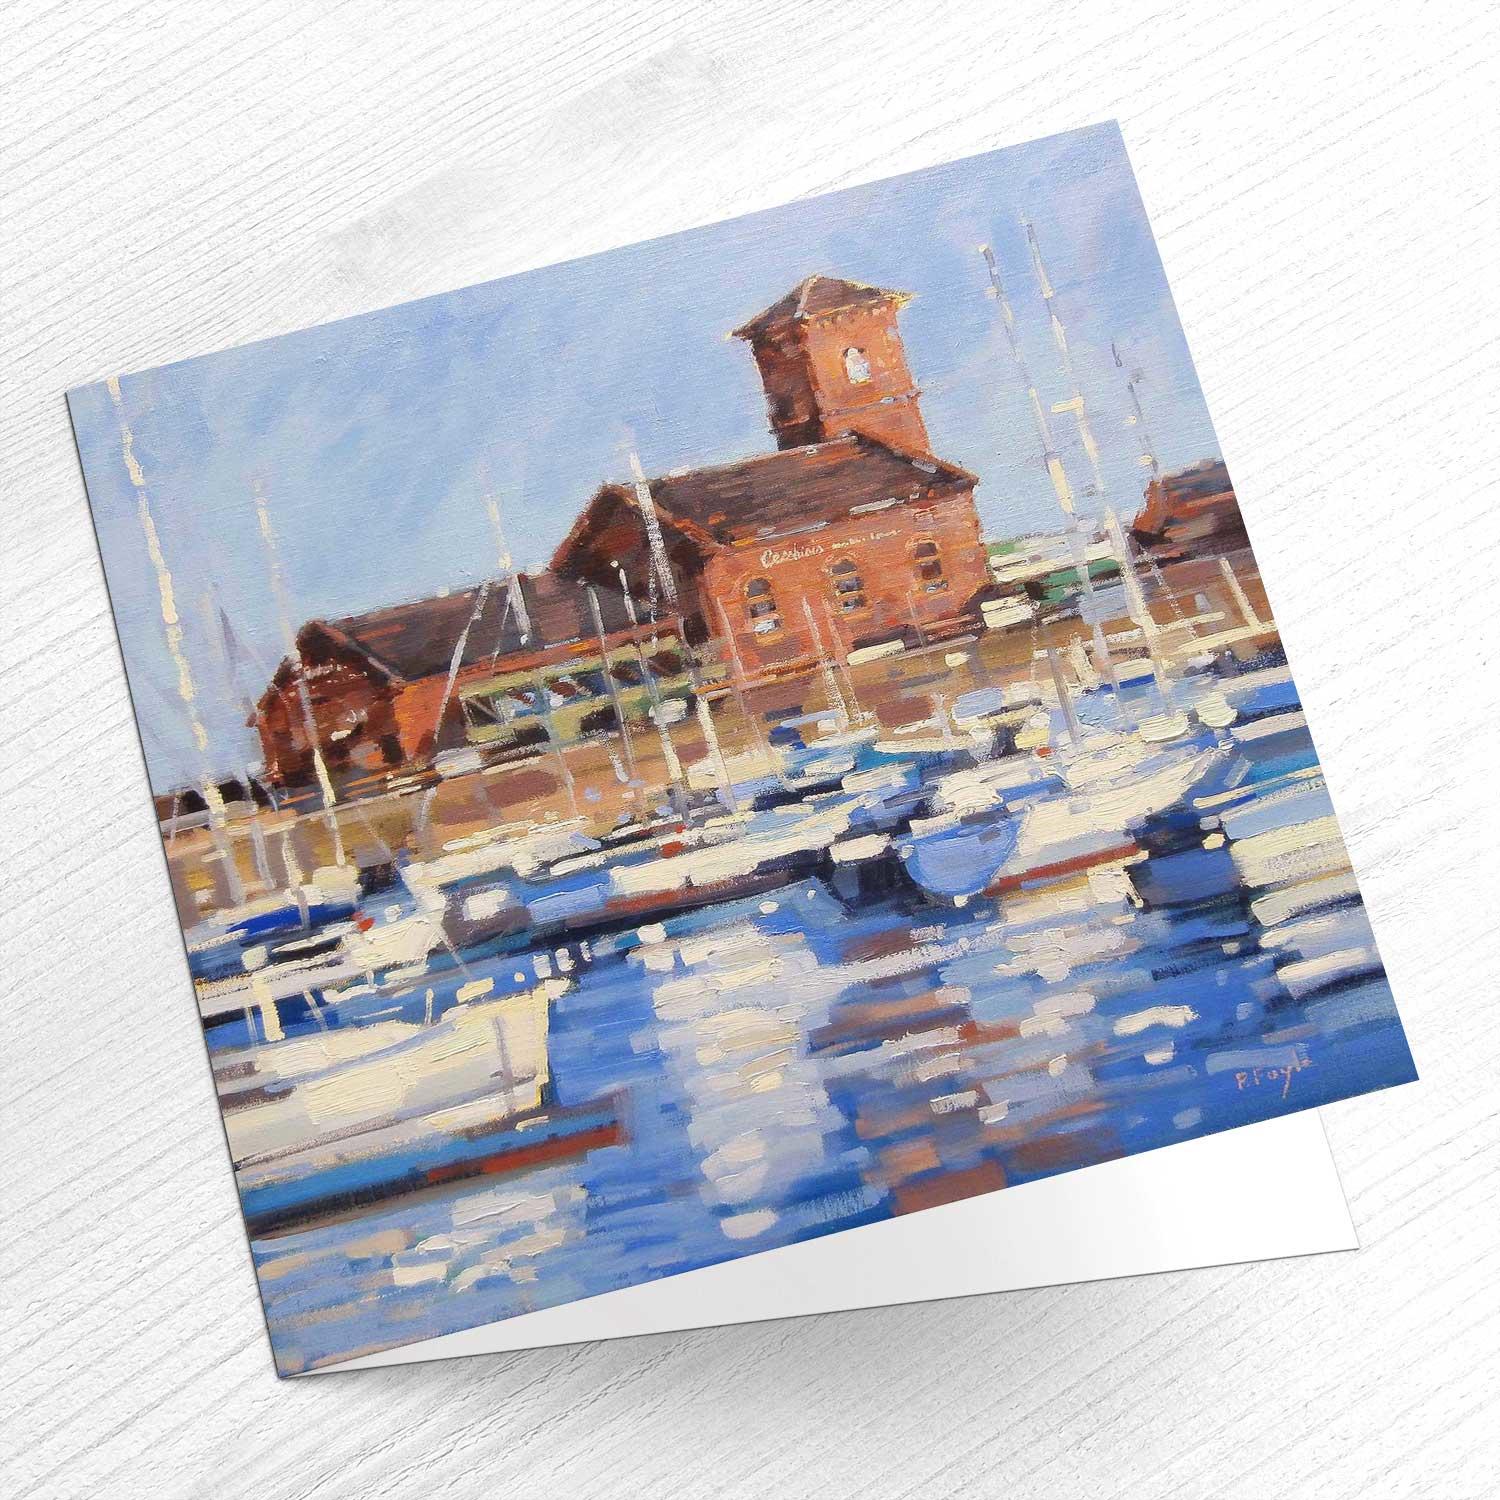 Cecchini's Ardrossan Greeting Card from an original painting by artist Peter Foyle